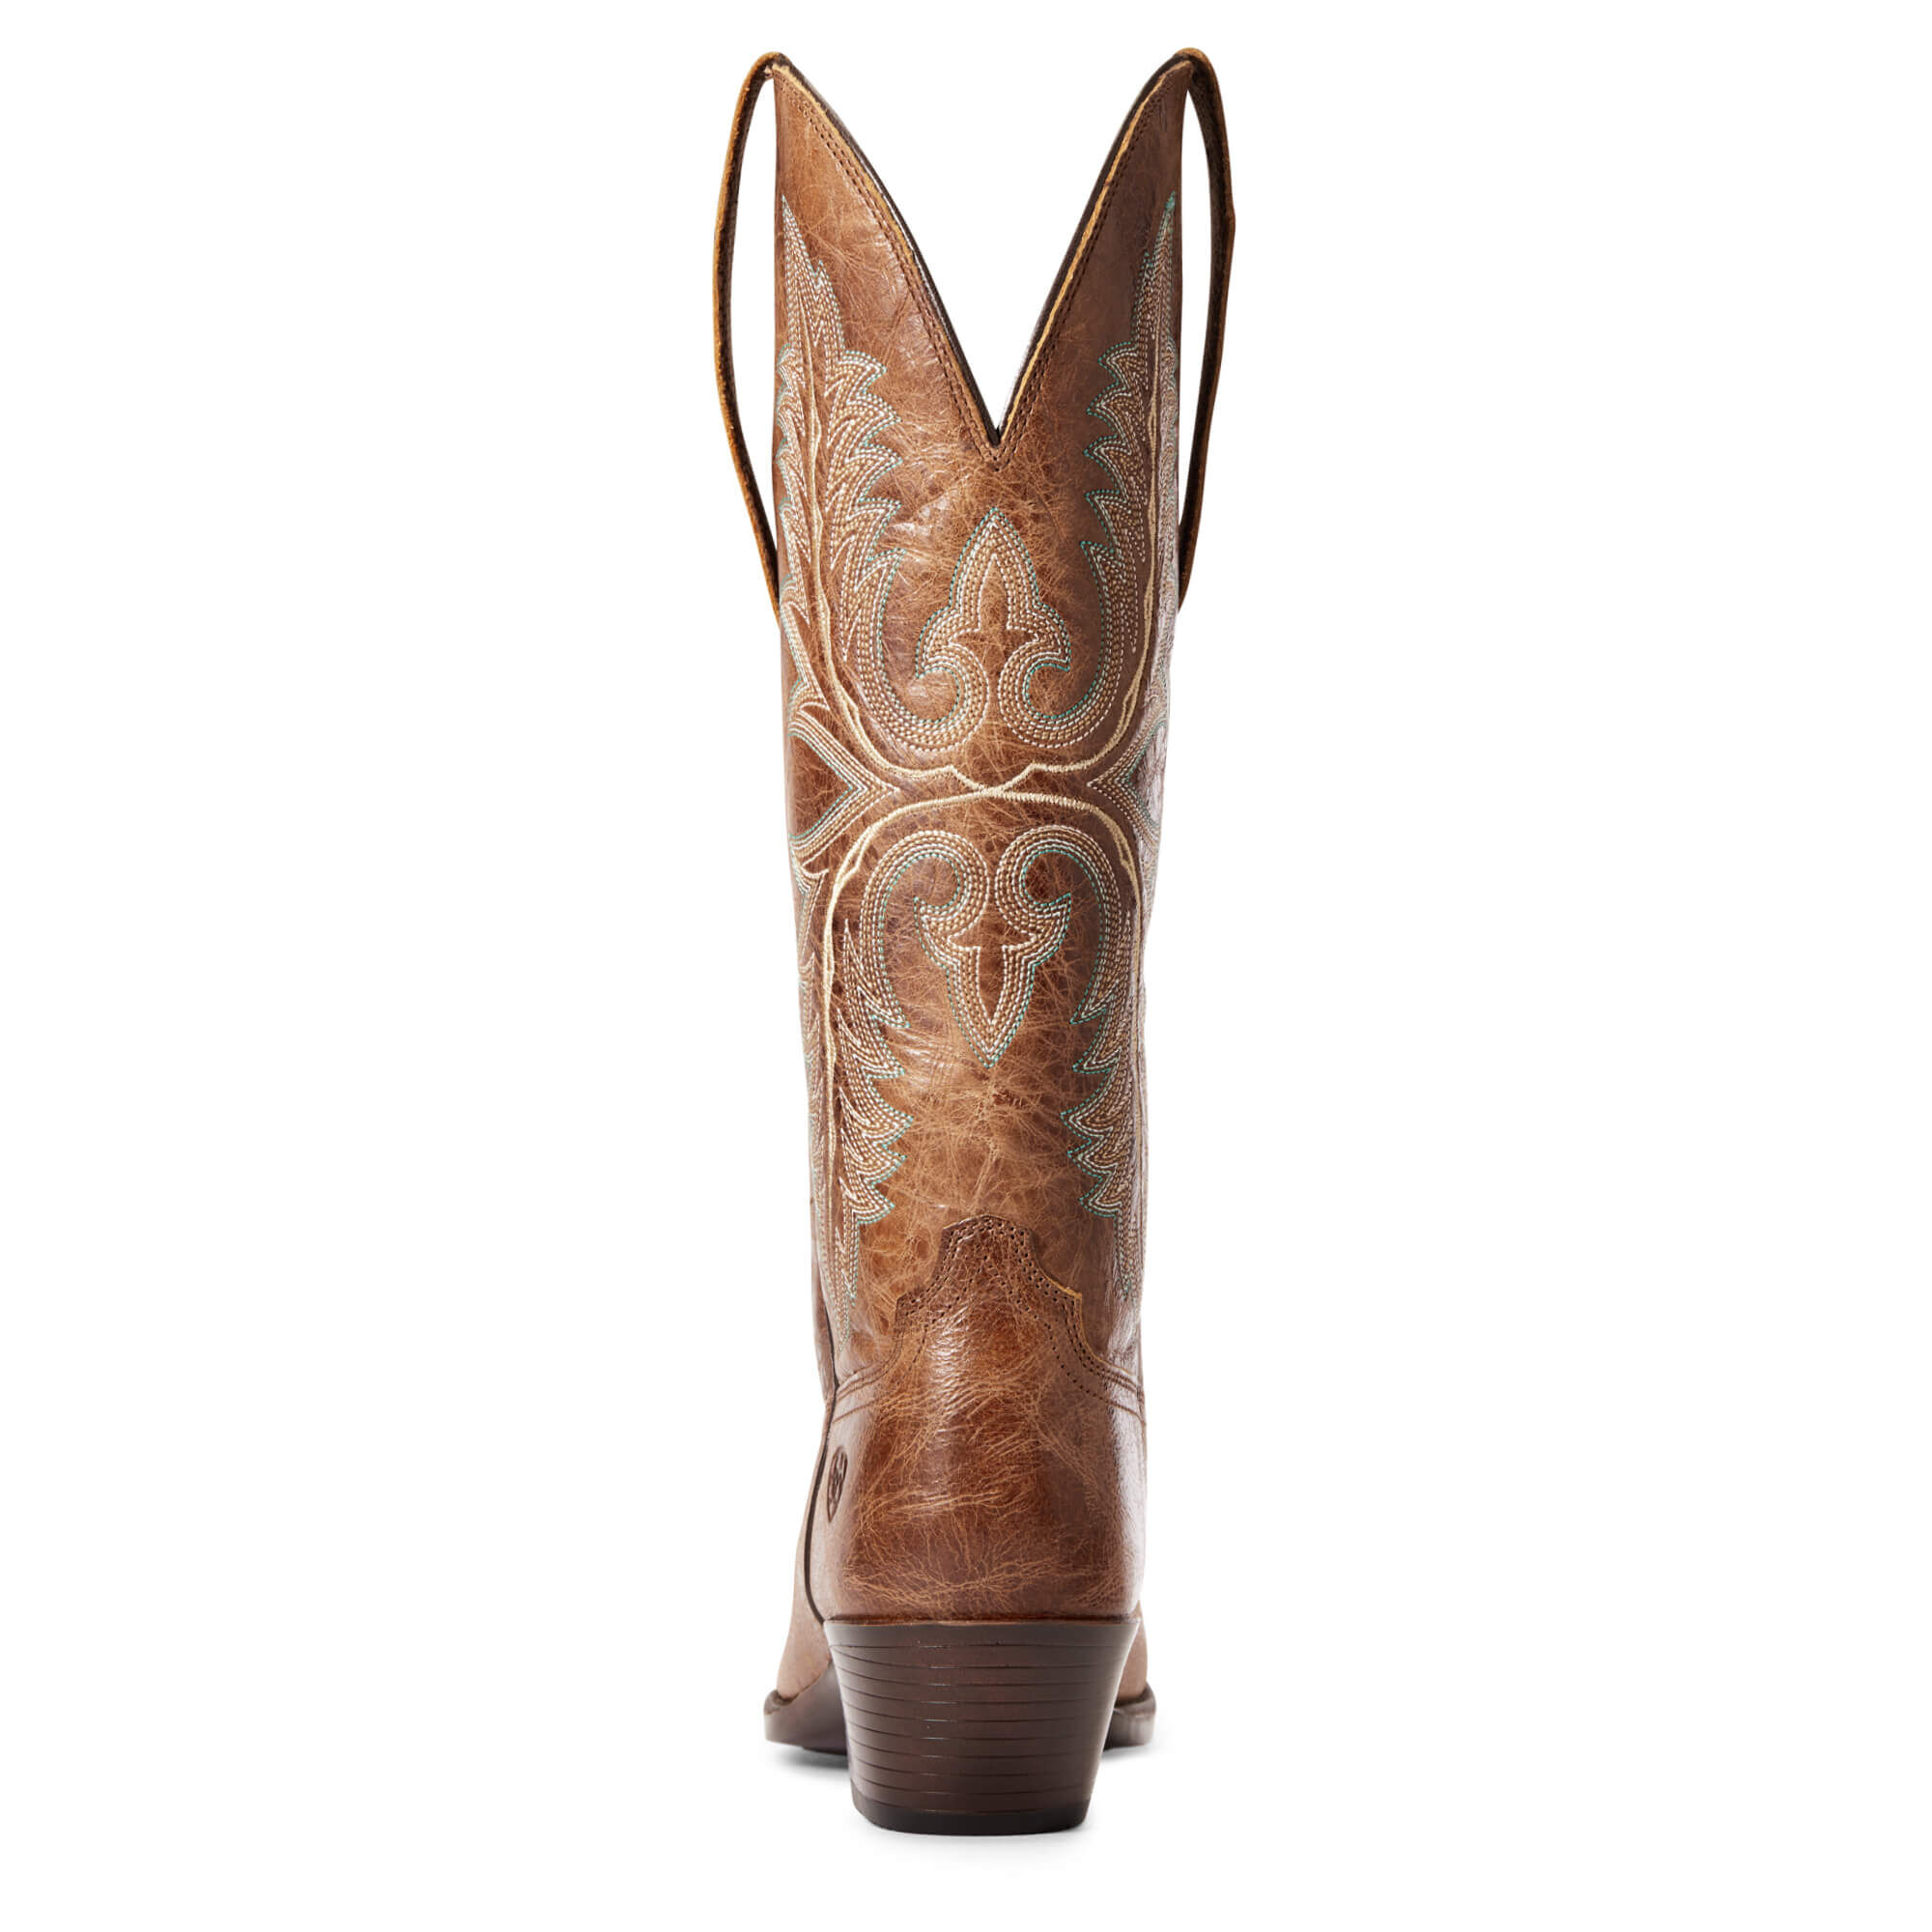 ariat elastic sided boots